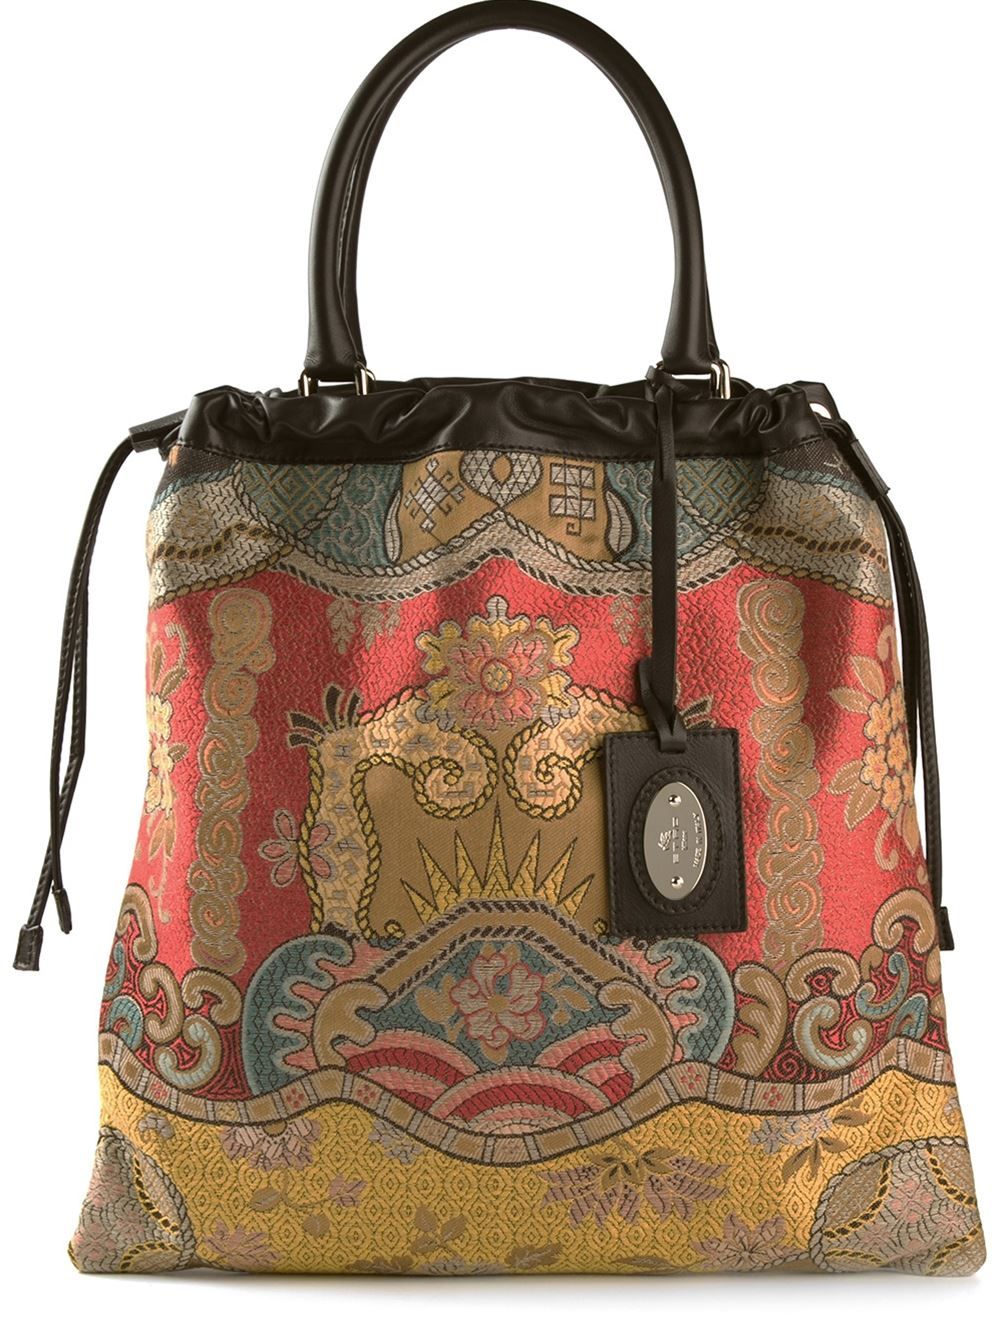 Lyst - Etro Embroidered Tote Bag for Men